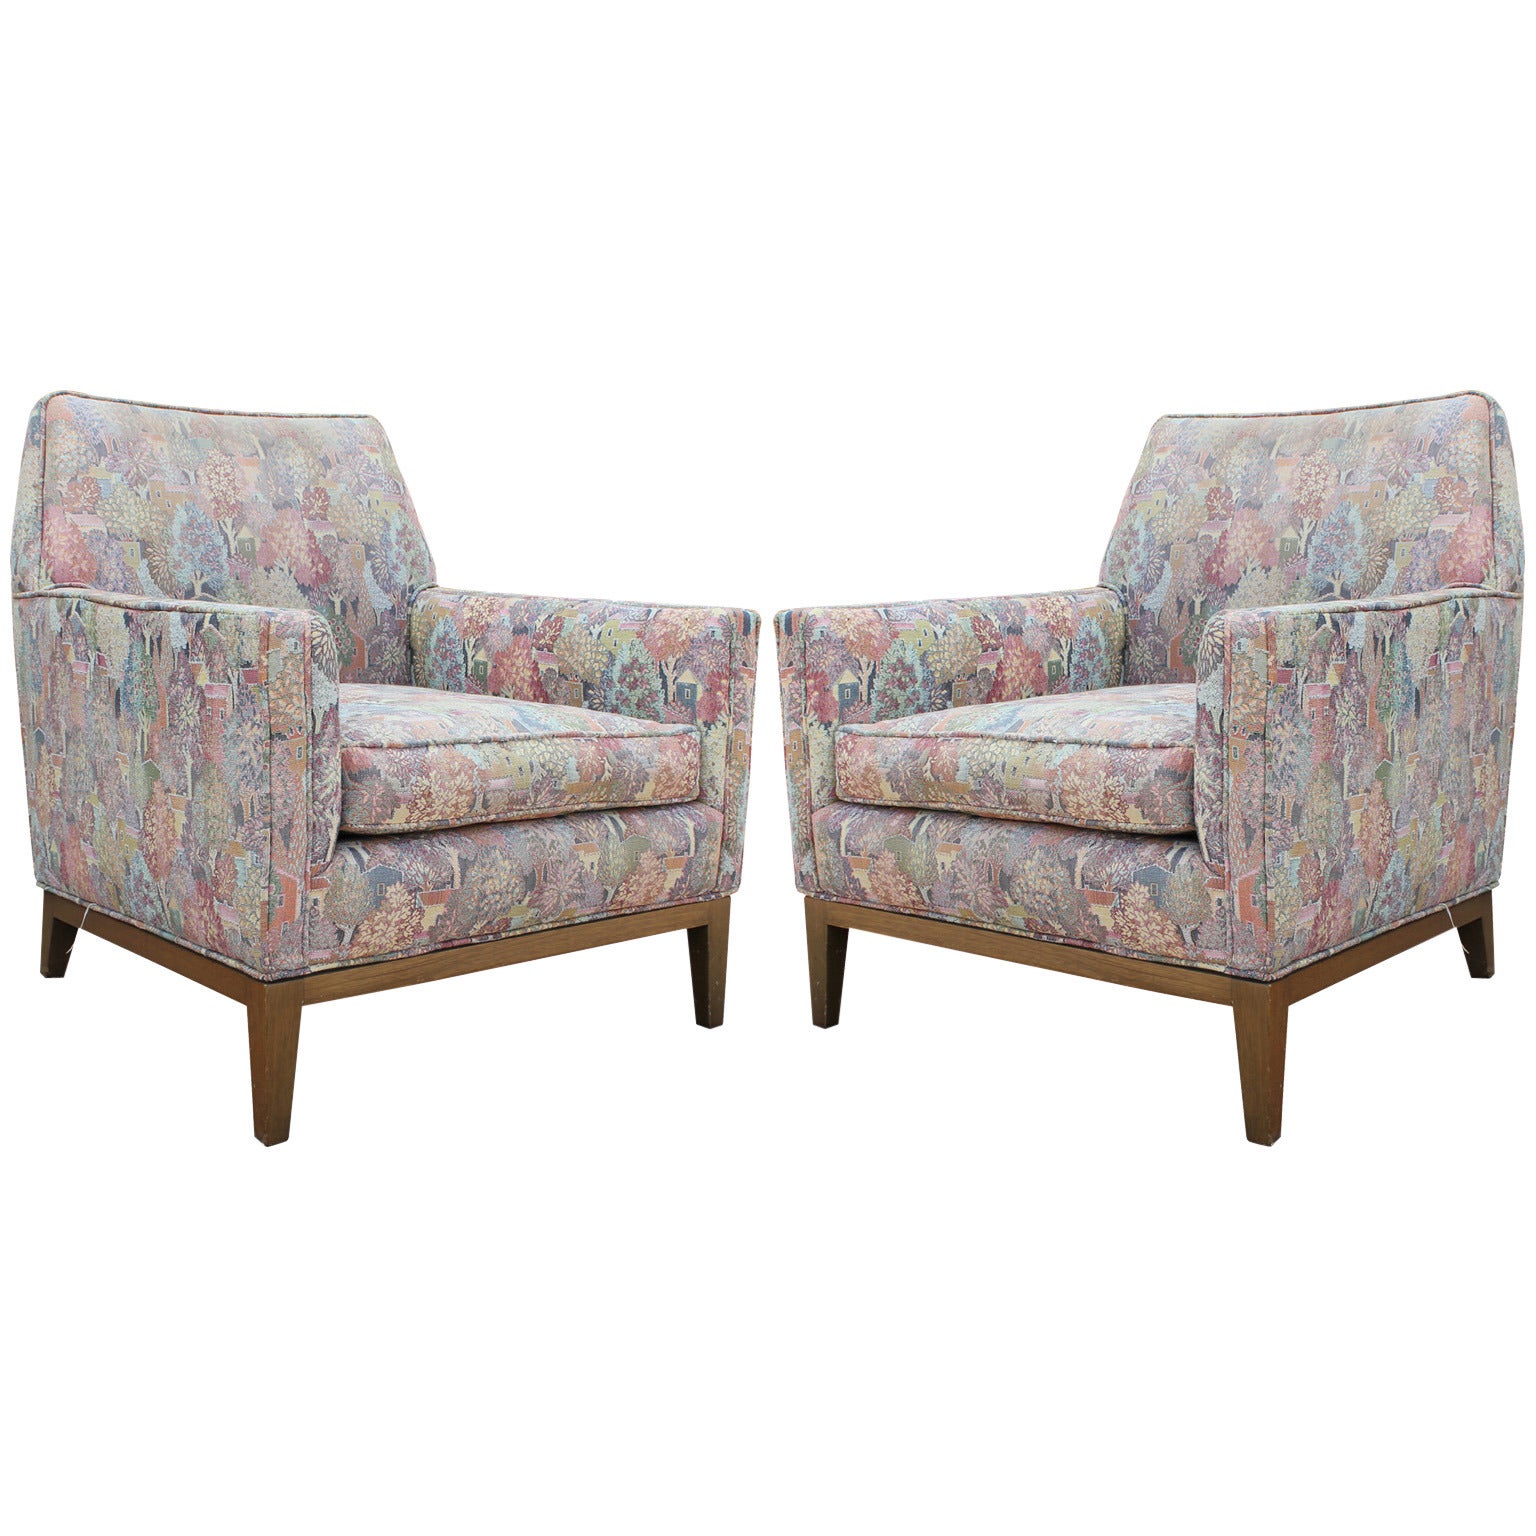 Pair of Edward Wormley for Dunbar Modern Lounge Chairs with Walnut Base